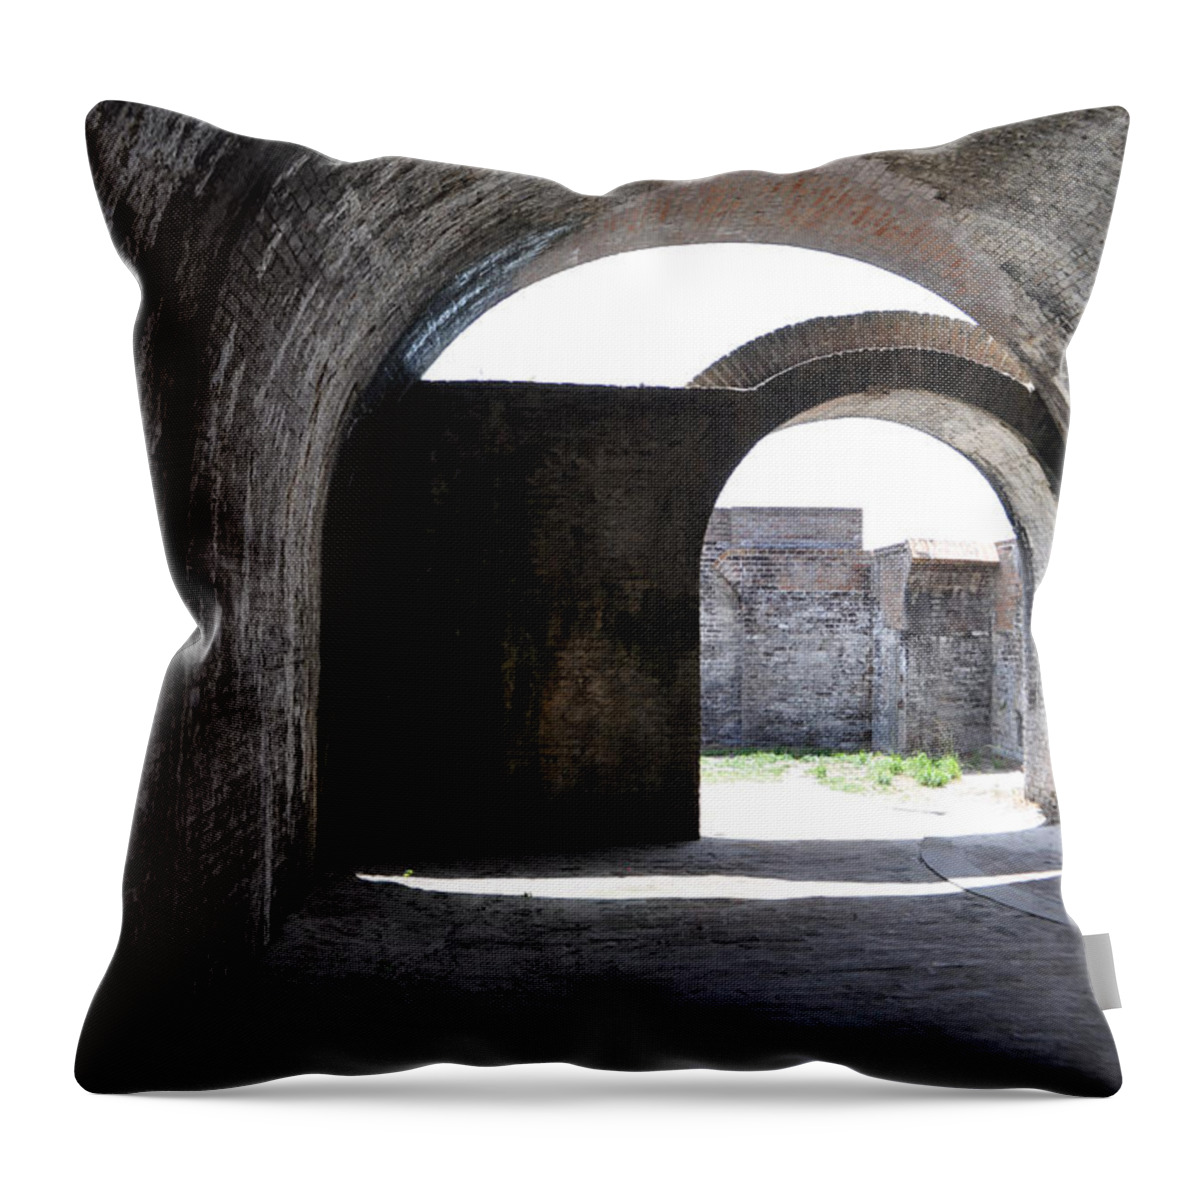 Fort Throw Pillow featuring the photograph Tunnel3 by Anjanette Douglas